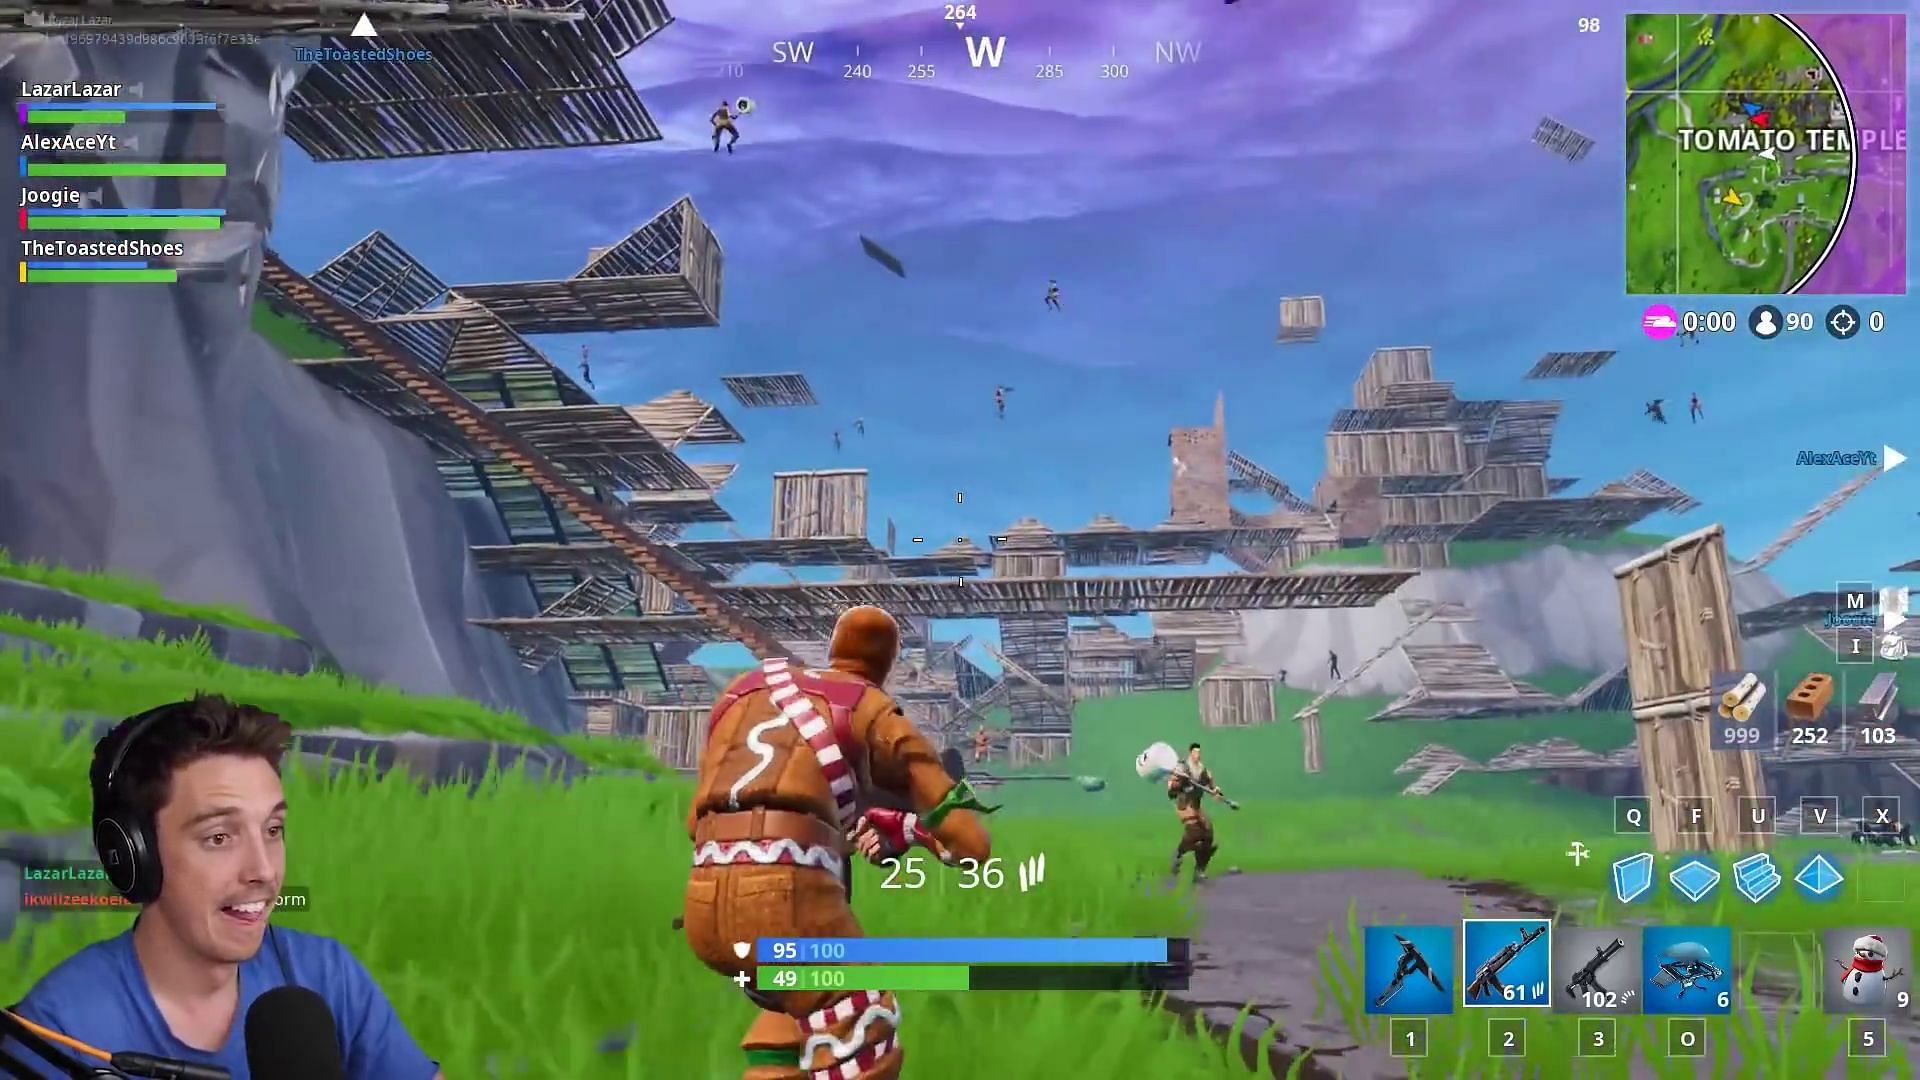 Players levitating in the sky as builds start to appear randomly (Image via Lazarbeam/YouTube)